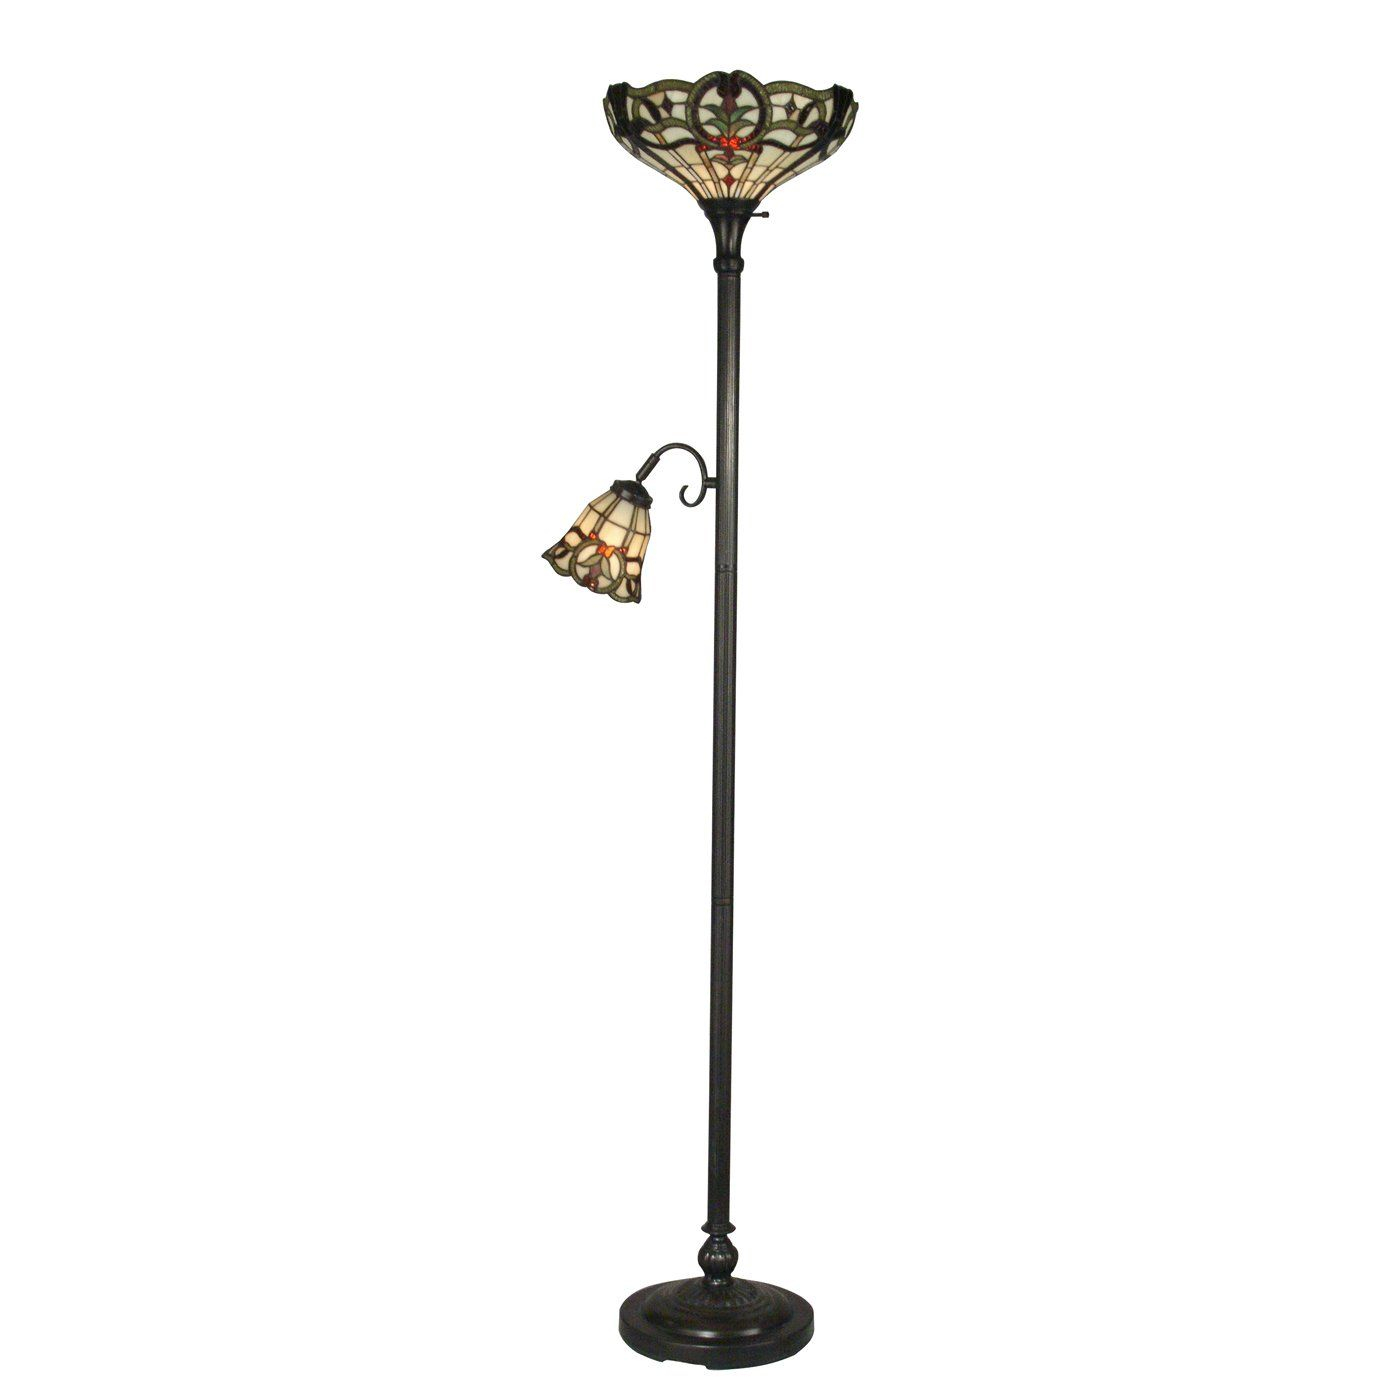 Dale Tiffany Tr10022 2 Light Torchiere Side Floor Lamp Mica throughout size 1400 X 1400